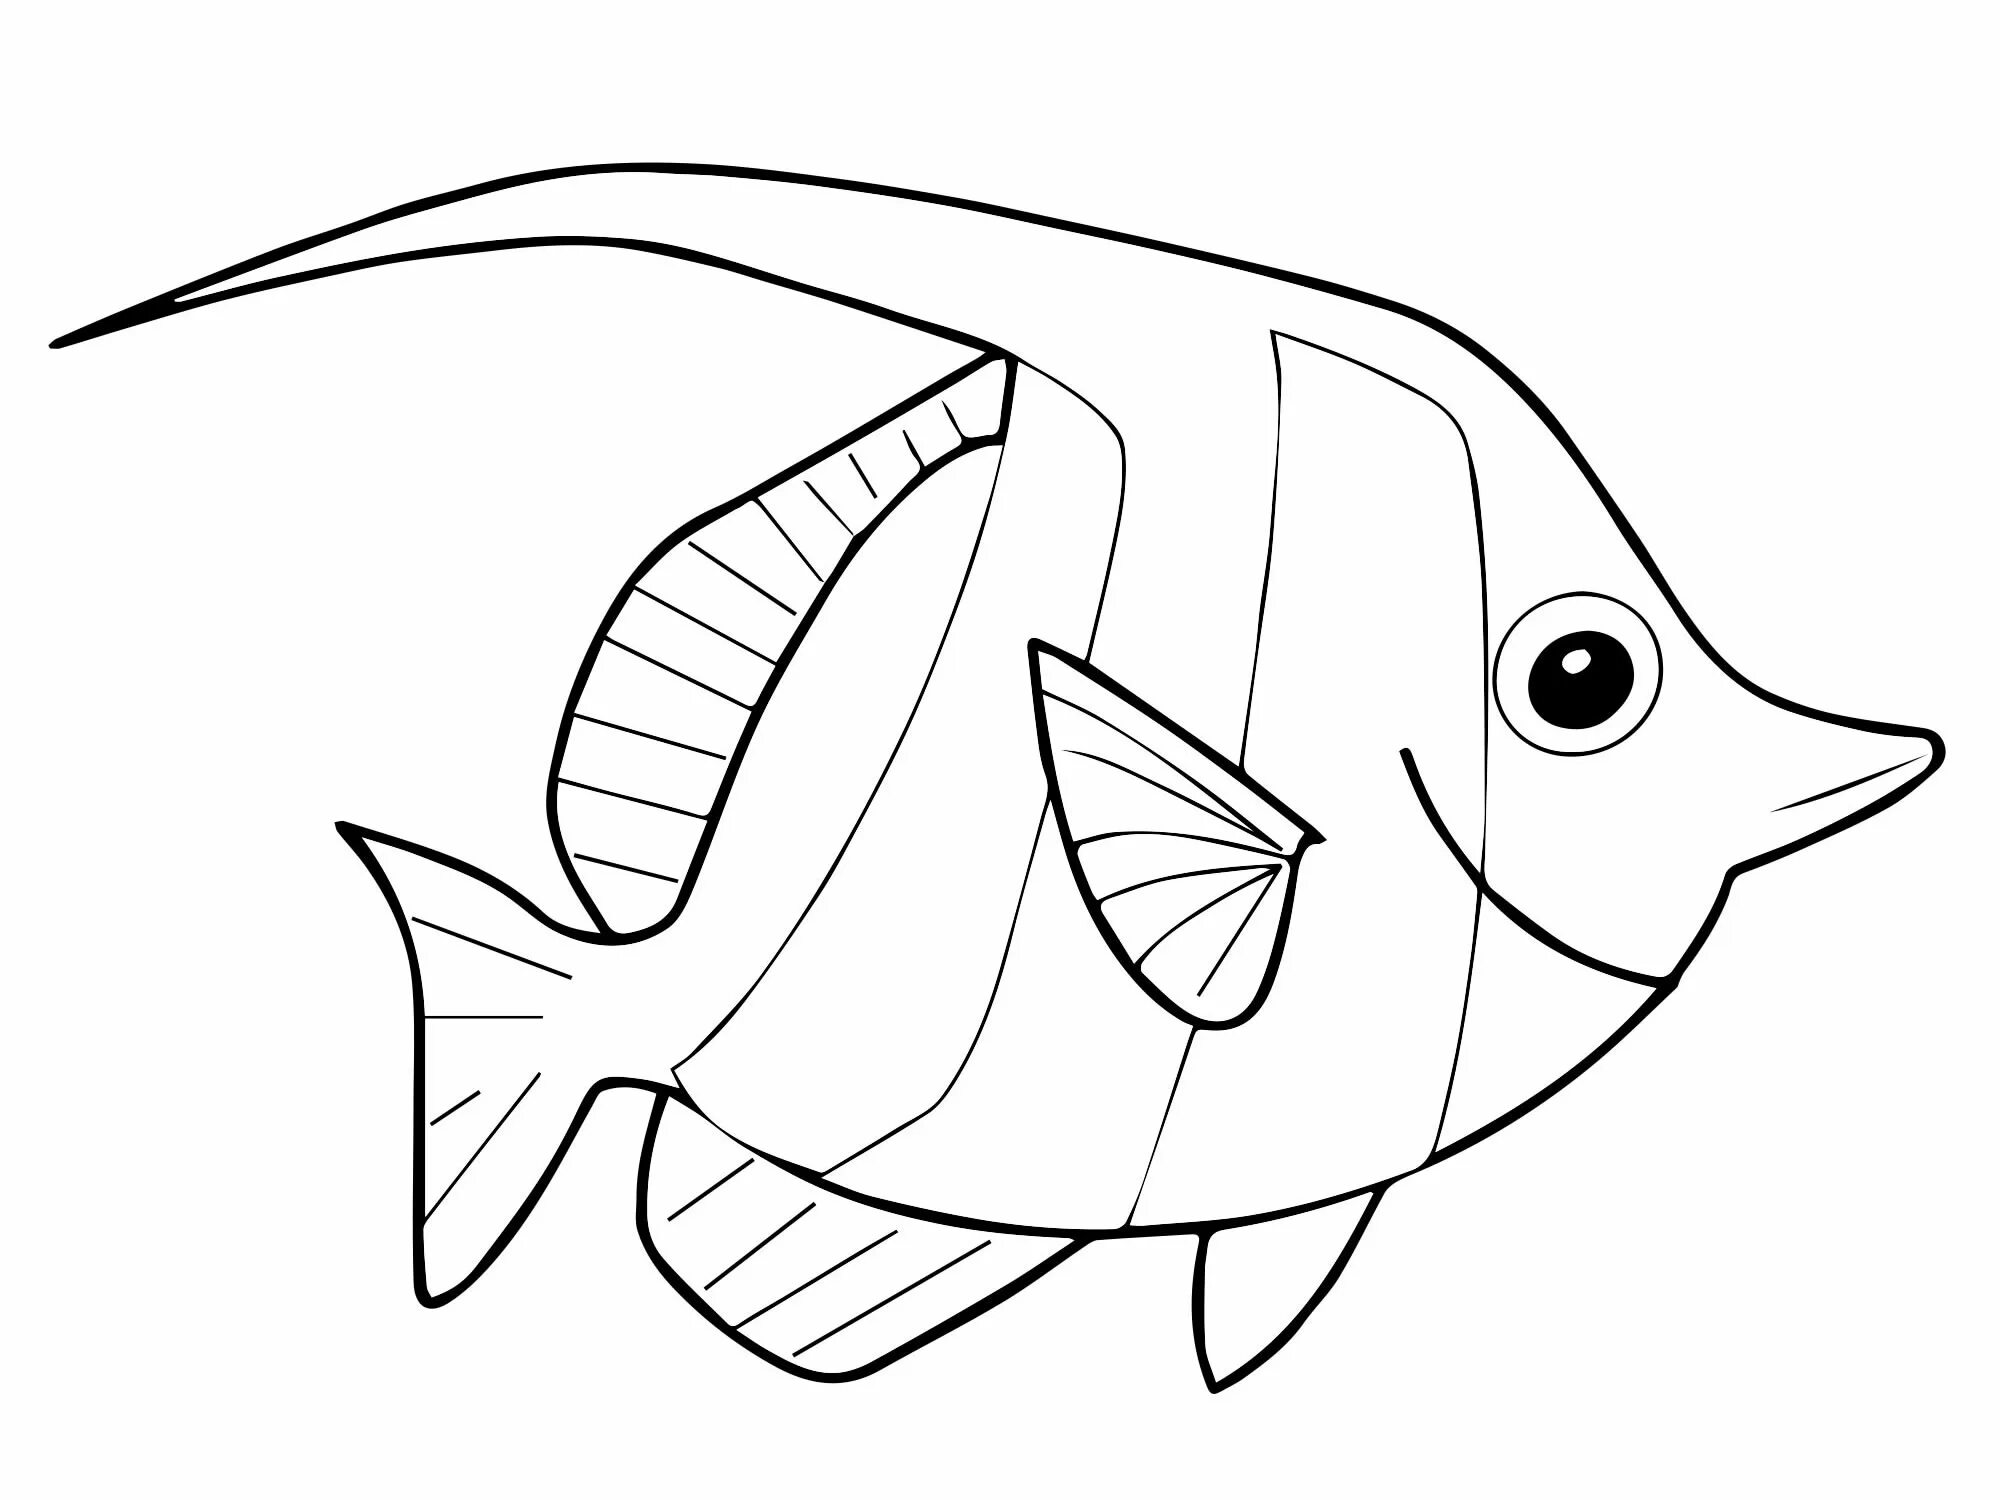 Fish pattern for kids #13